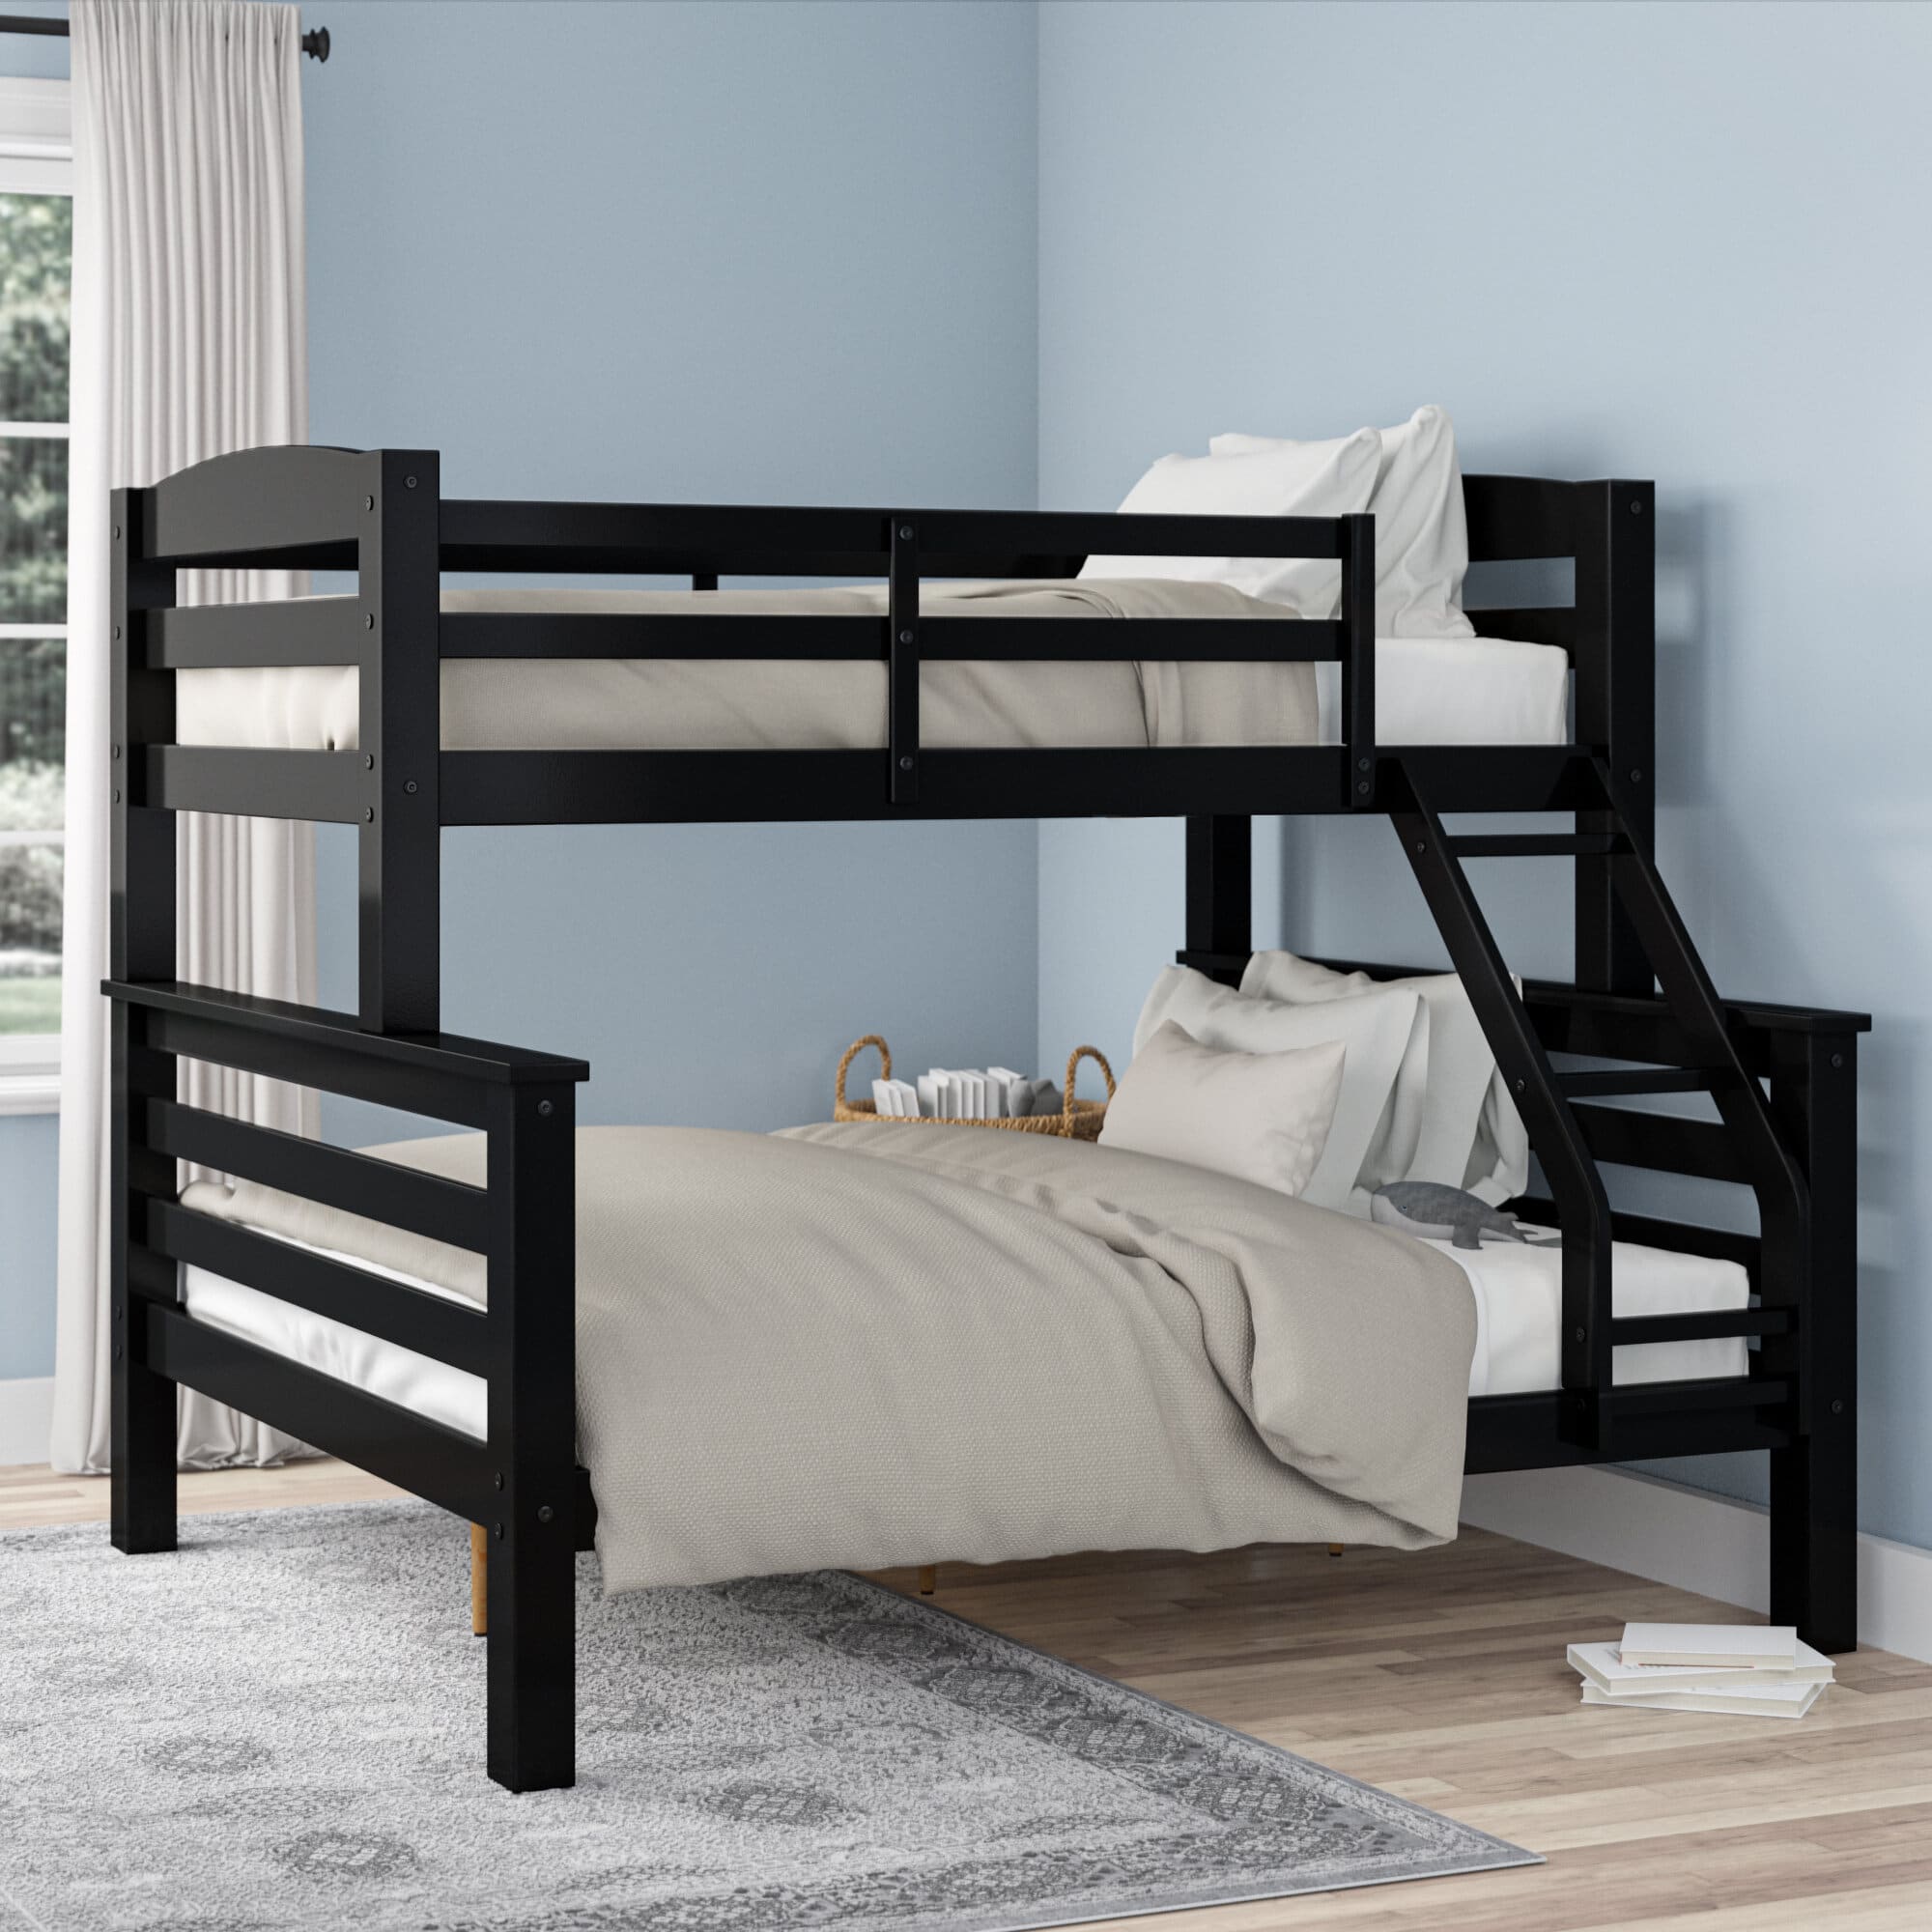 6 Best Twin Over Full Bunk Beds May, Wooden Bunk Beds That Separate